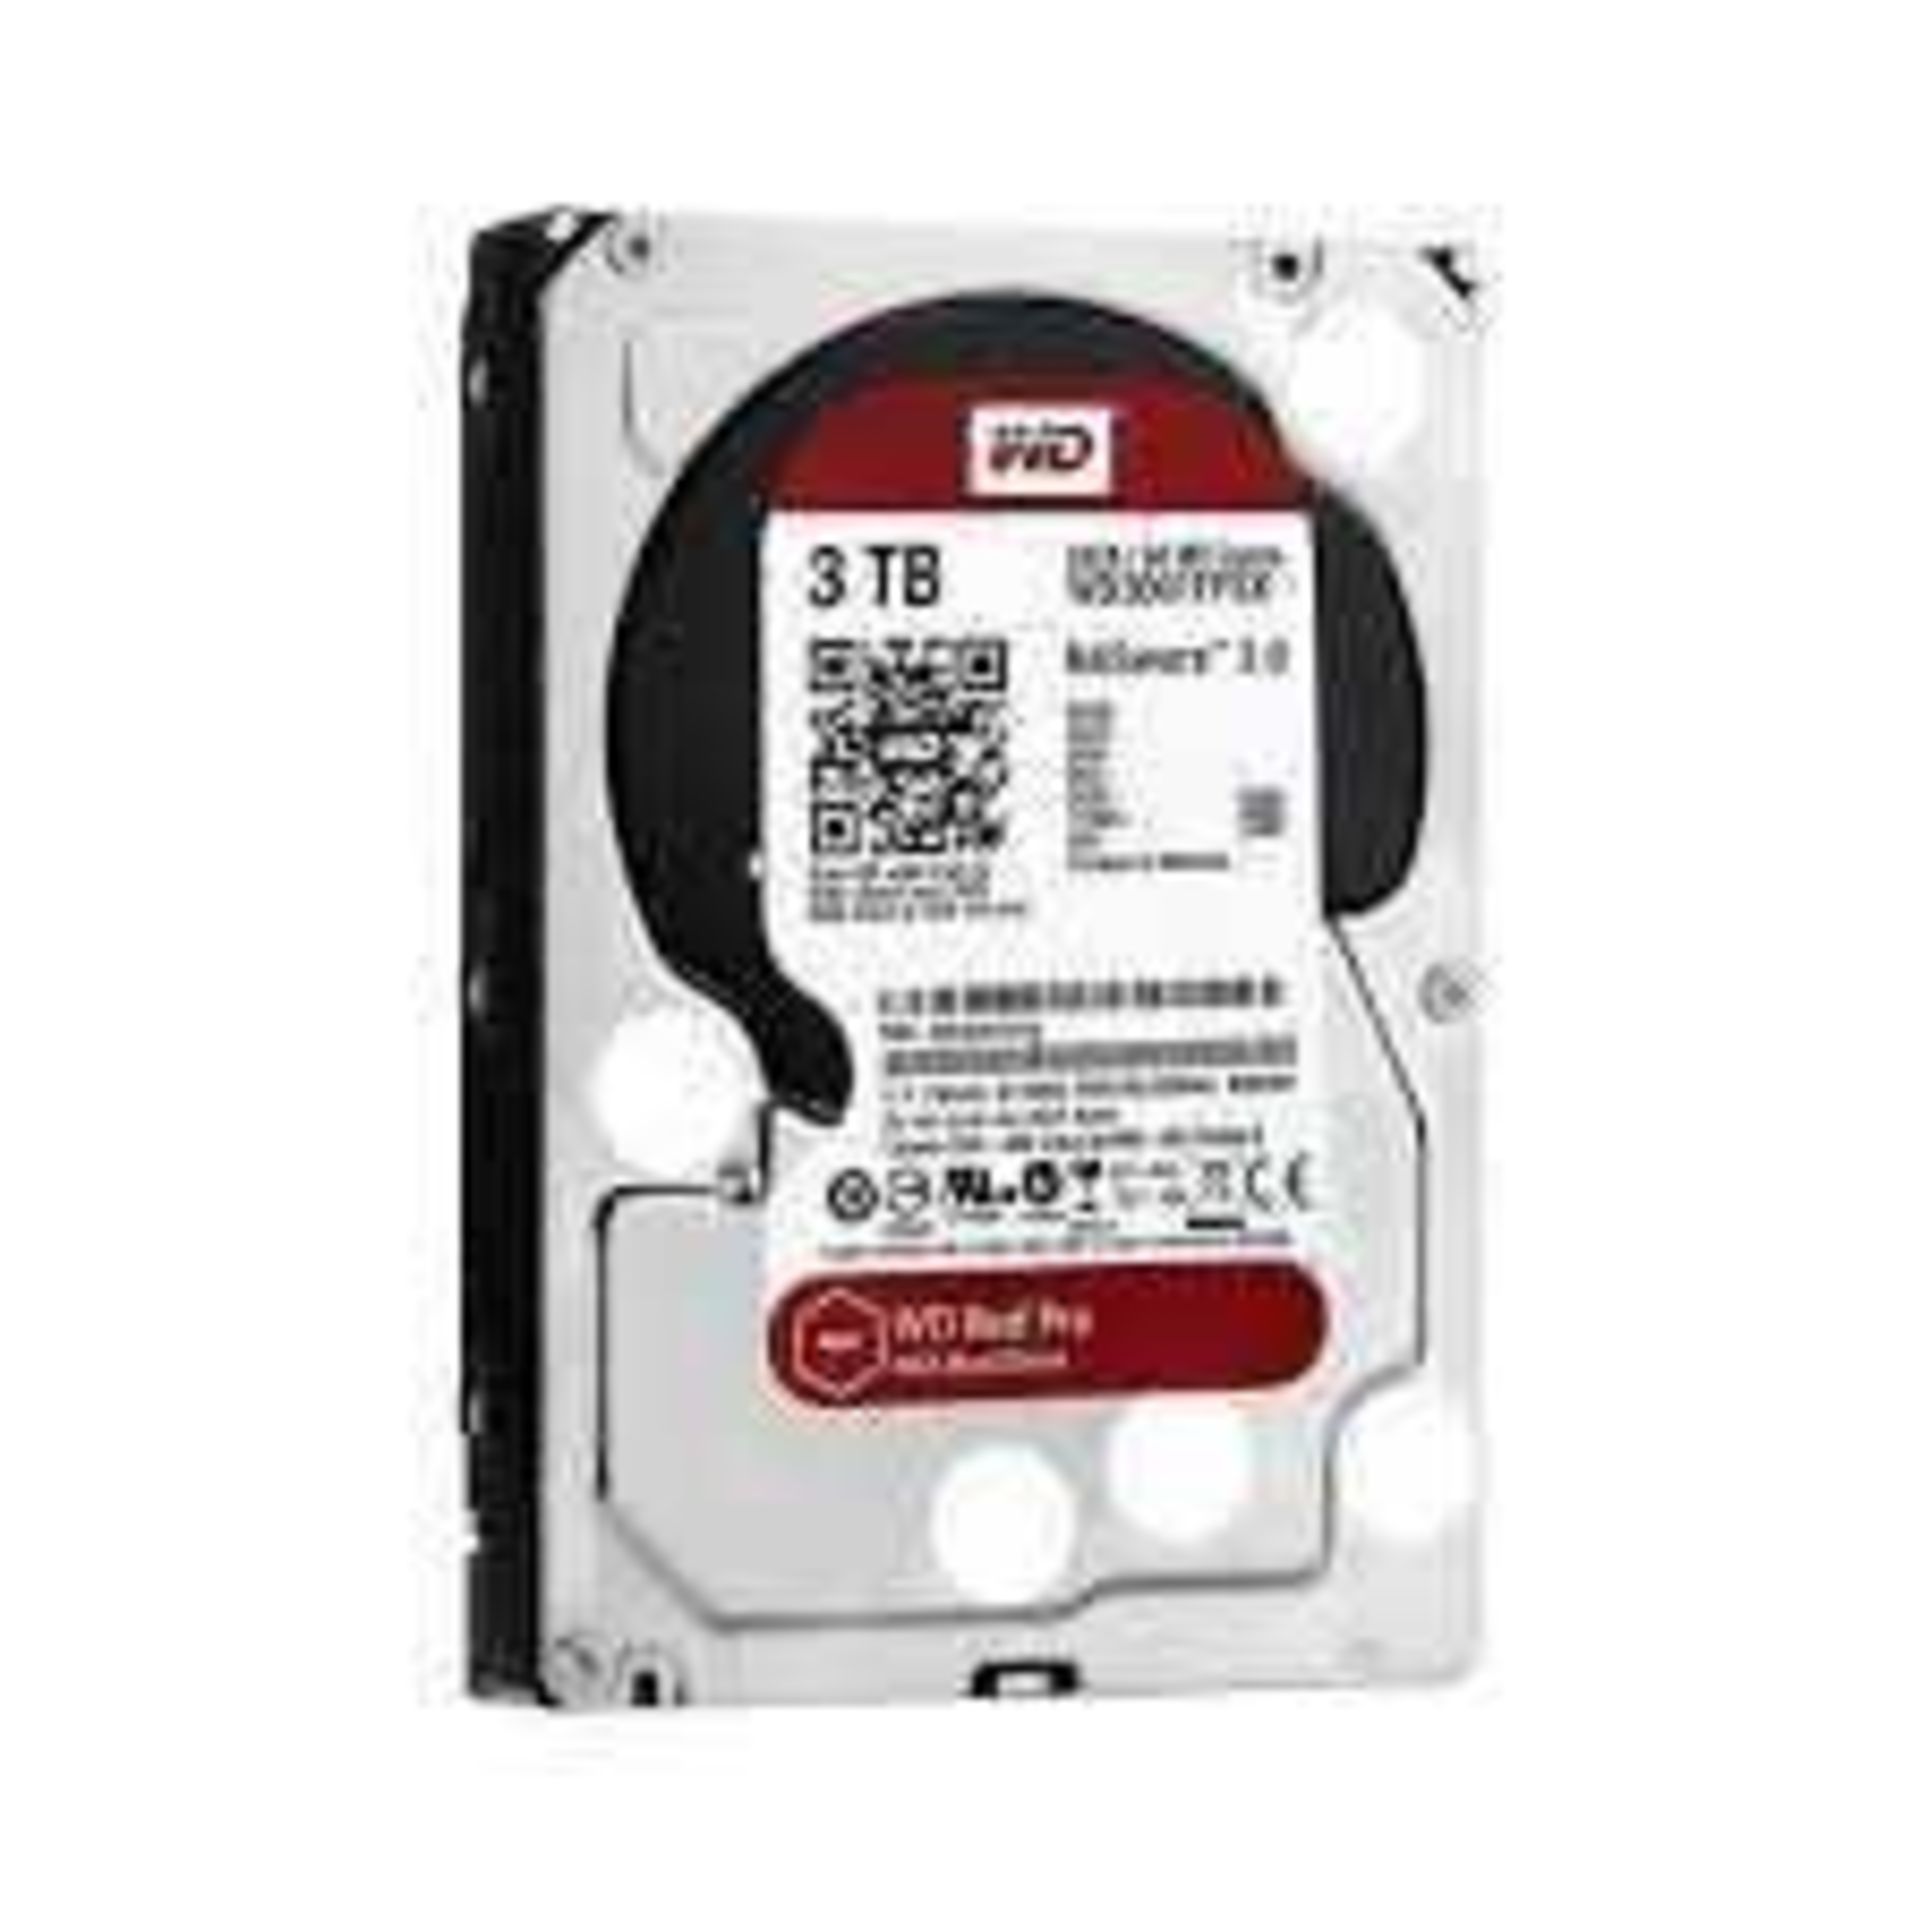 RRP £110 Brand New Western Digital Naswear 3.0 3Tb Internal Hard Drive (Appraisals Available On